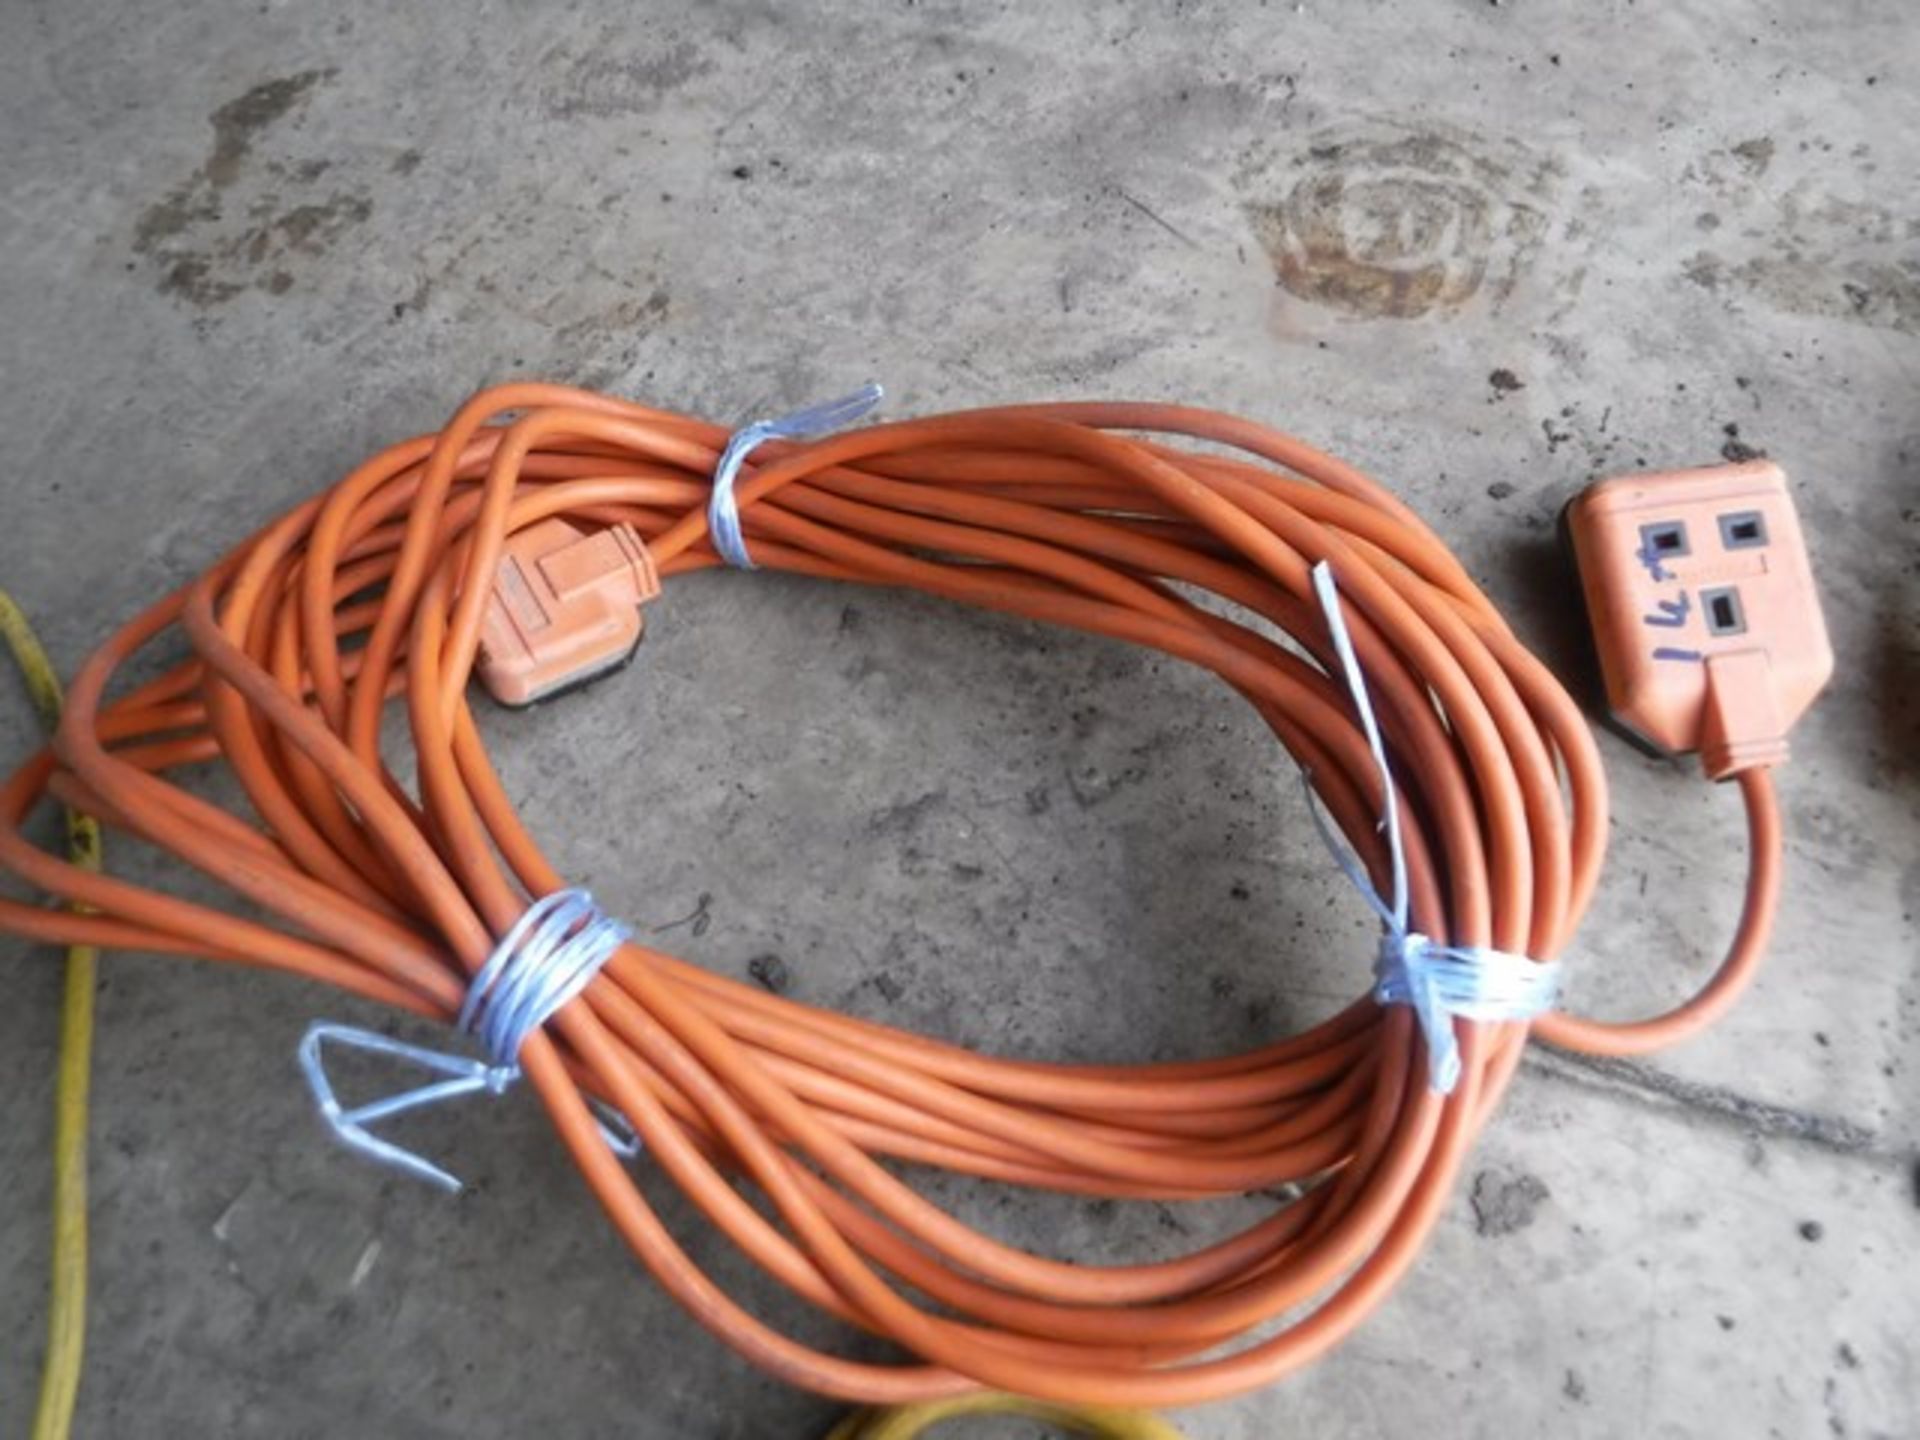 VARIOUS EXTENSION CABLES, 2x3 PRONG CONNECTORS AND 1 SOCKET EXTENSION - Image 11 of 13